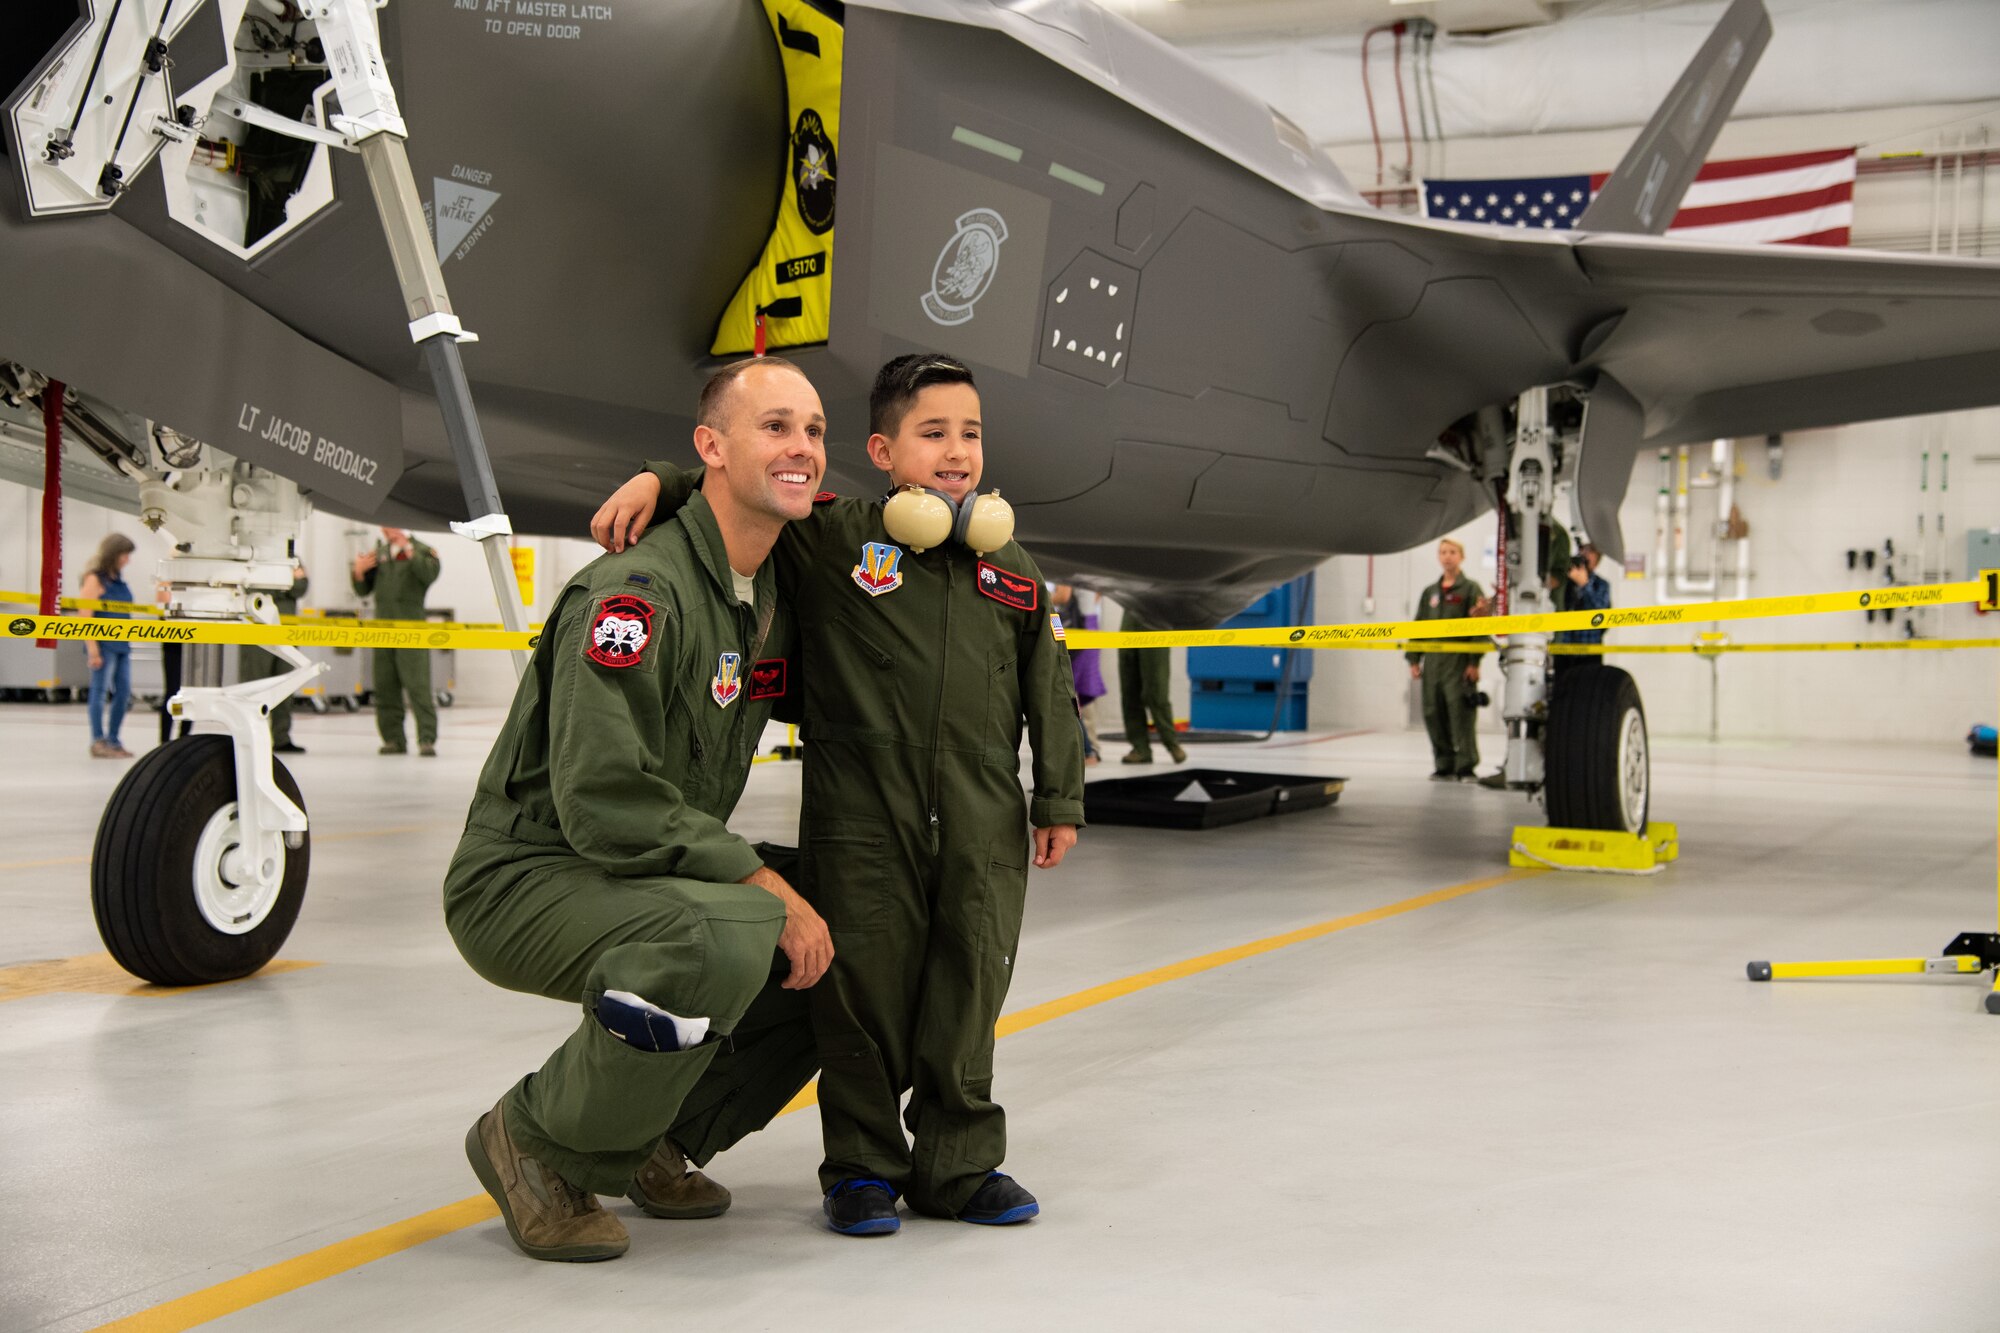 Dash Garcia poses for a photo with 1st Lt. John Horn, May 24, 2108, at Hill Air Force Base, Utah. Eight children and their parents from Make-A-Wish Utah visited Hill for the "Pilot for a Day" program. The children toured the base, visited with pilots and "flew" in an F-35A cockpit trainer during the event. (U.S. Air Force photo by R. Nial Bradshaw)